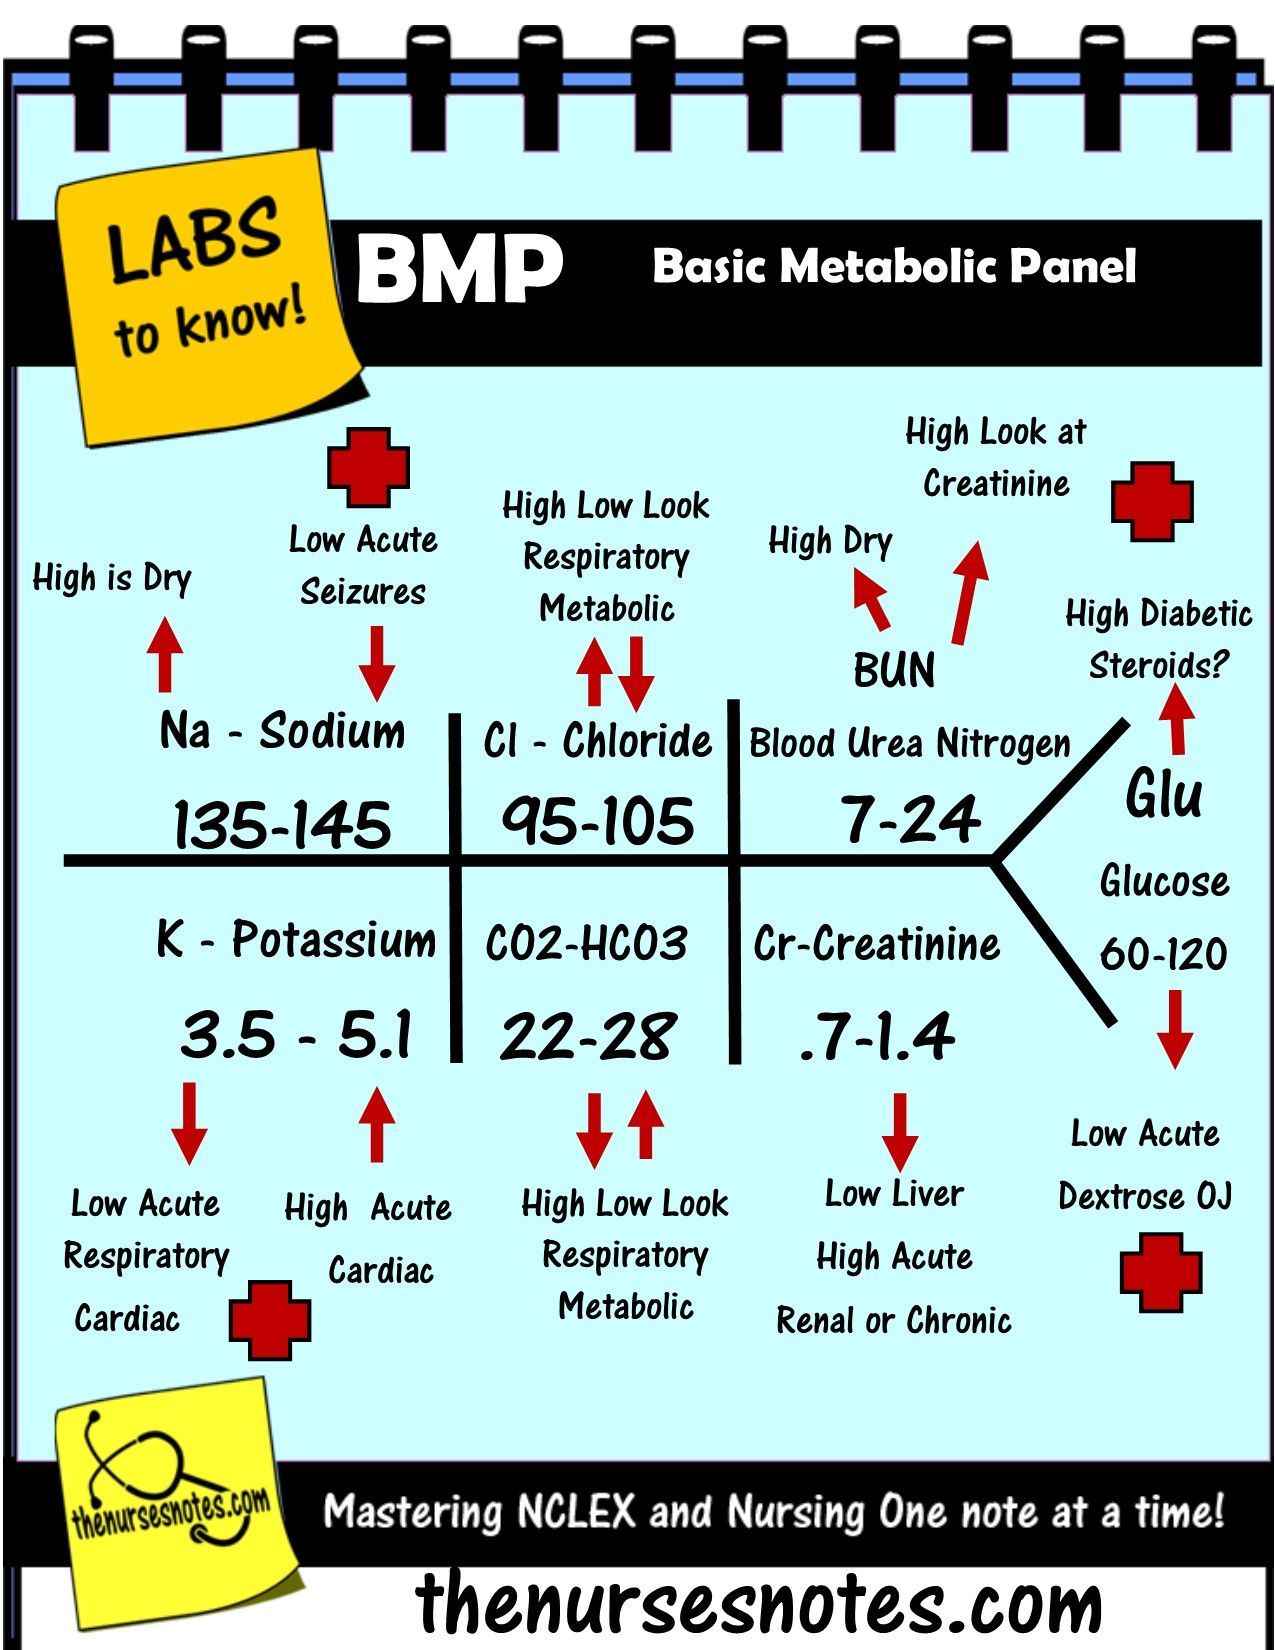 BMP Chem7 Fishbone Diagram explaining labs - From the Blood Book Theses are the Labs you should know H